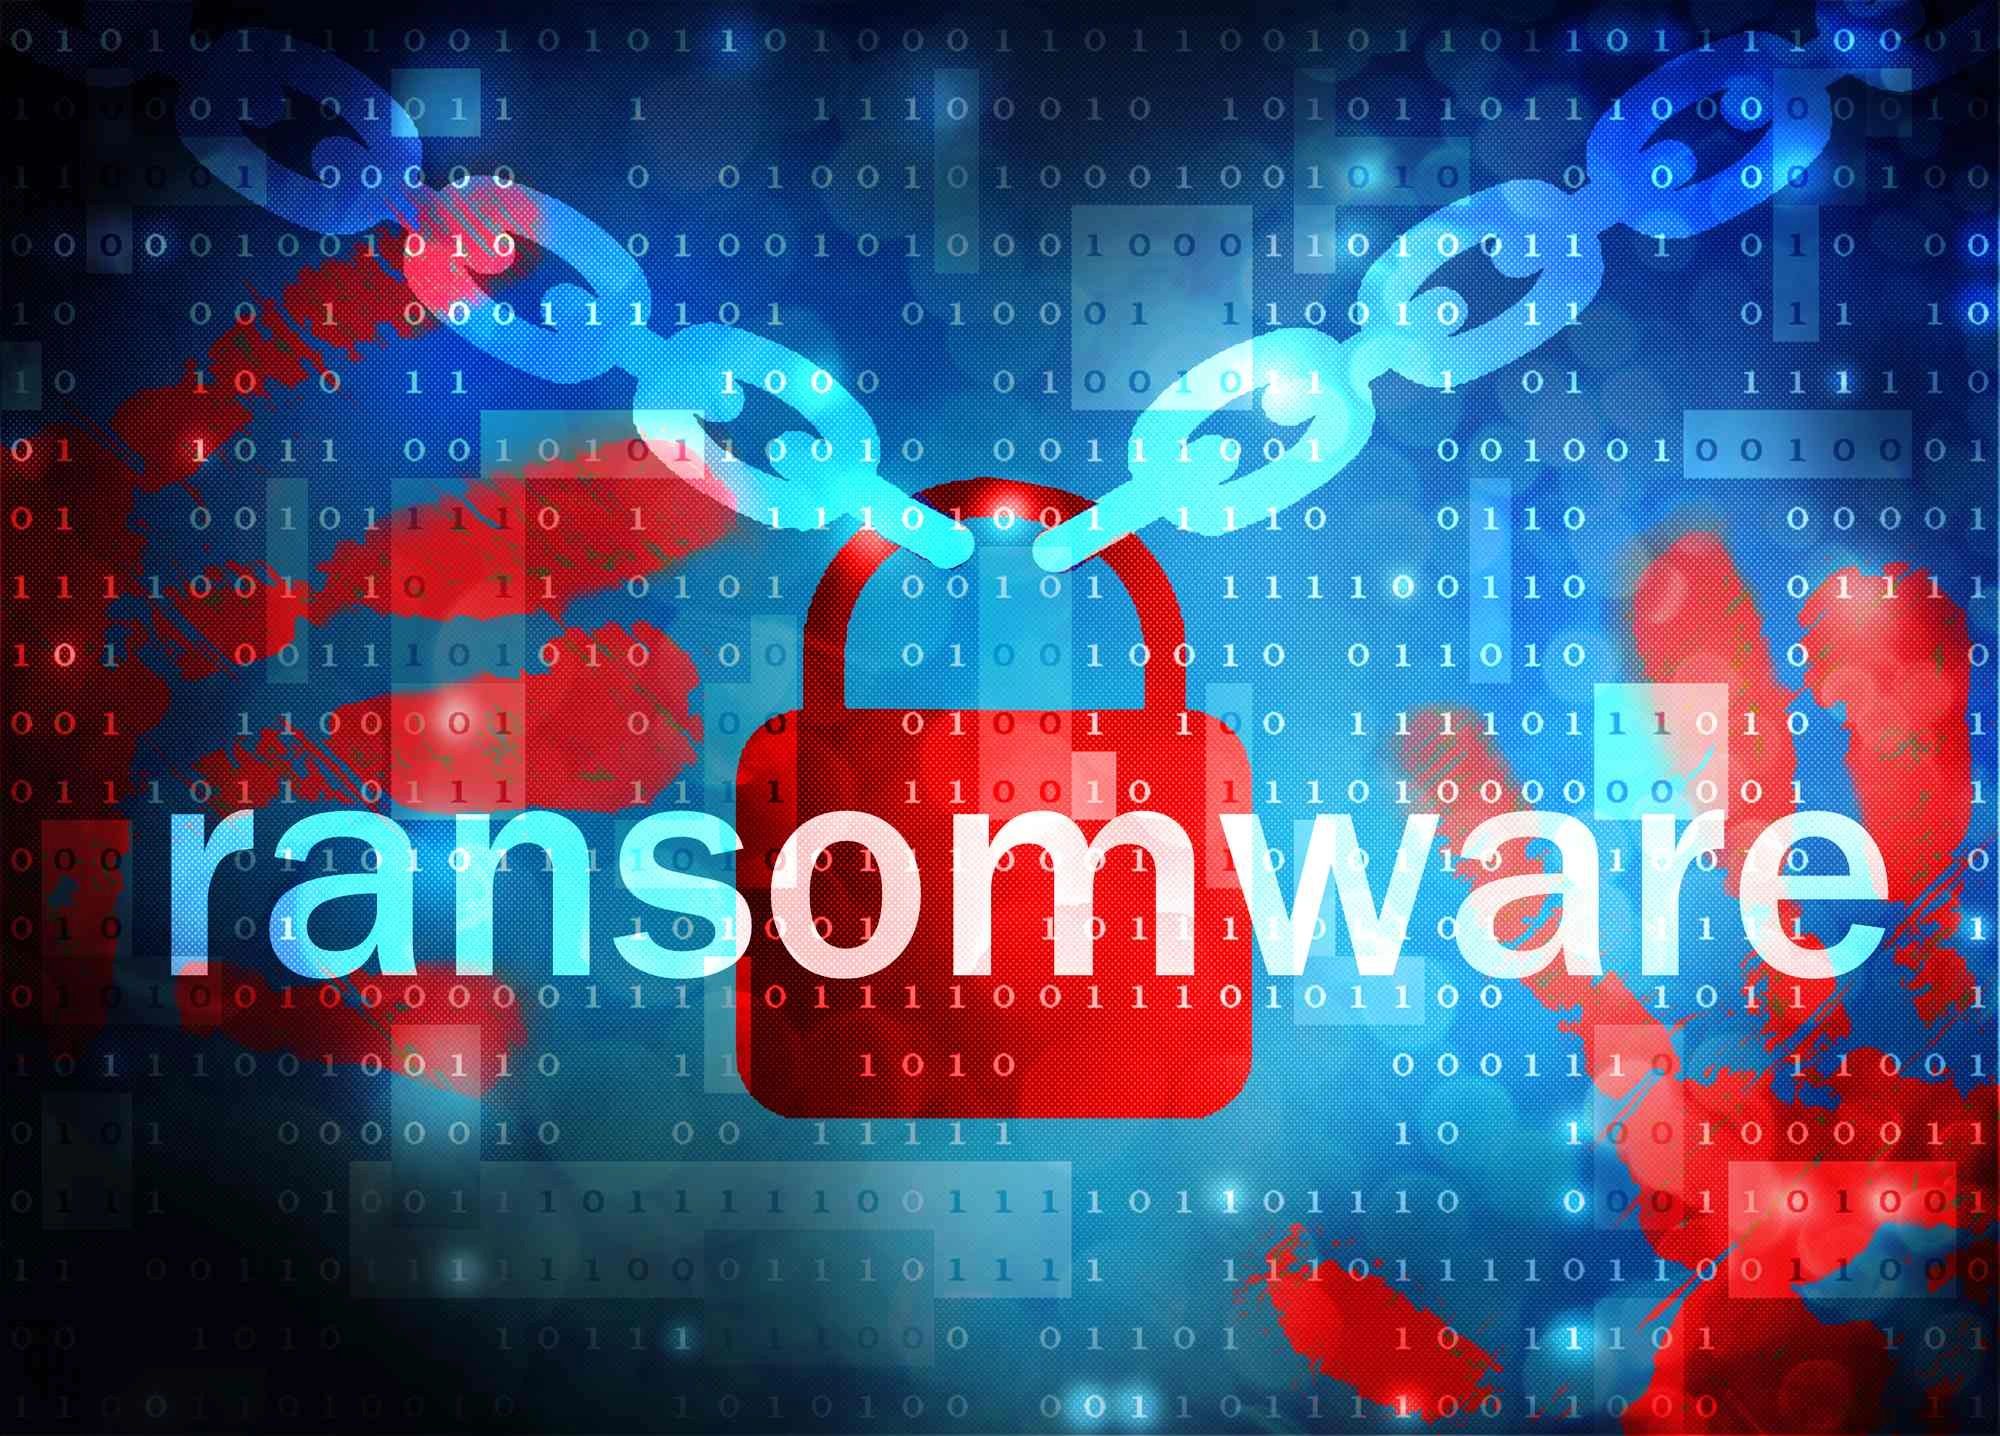 The ransomware threat is real We can help!